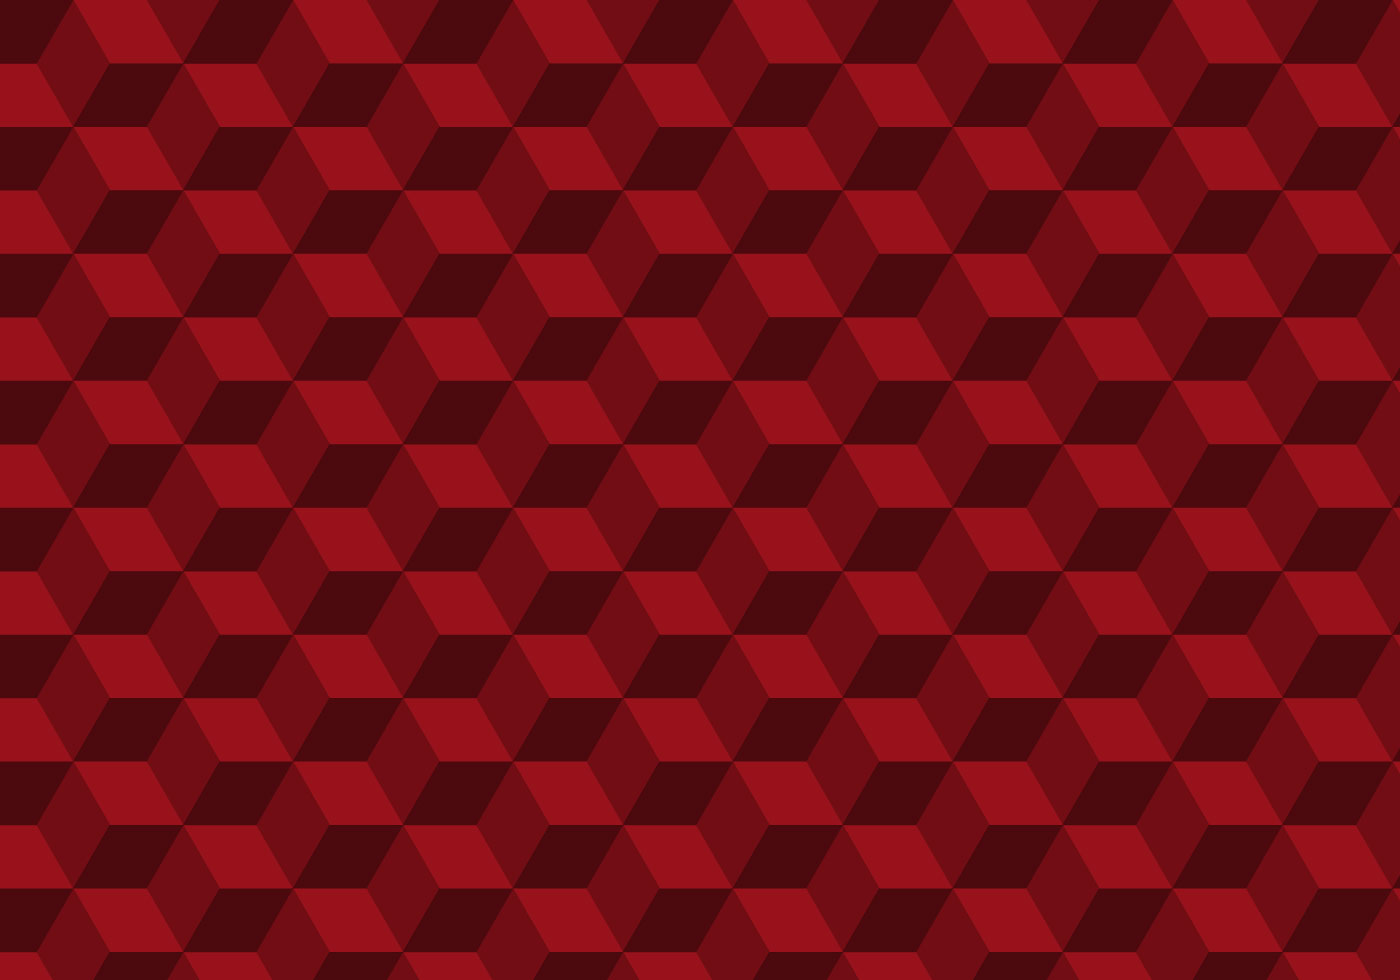 https://static.vecteezy.com/system/resources/previews/000/095/559/original/free-seamless-red-texture-vector.jpg